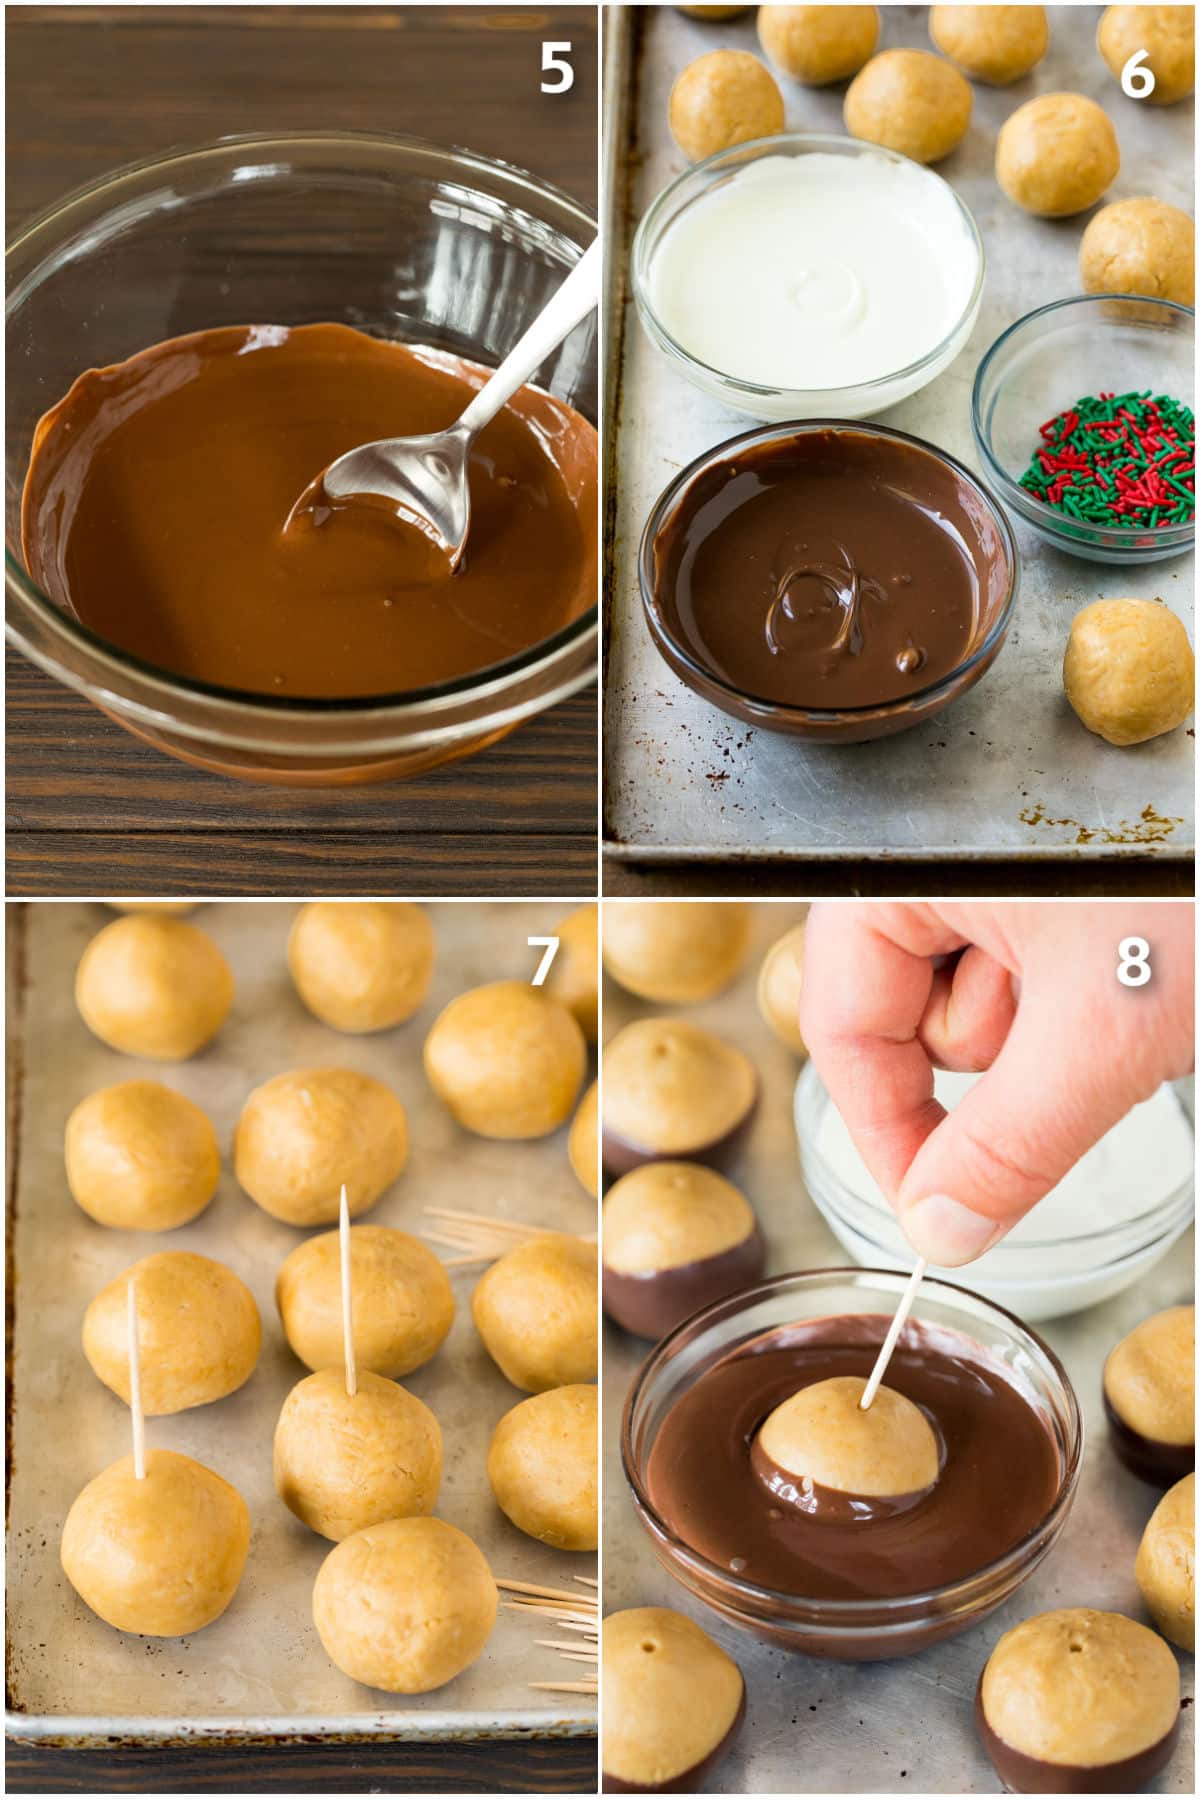 Process photos showing peanut butter candy being dipped in chocolate.